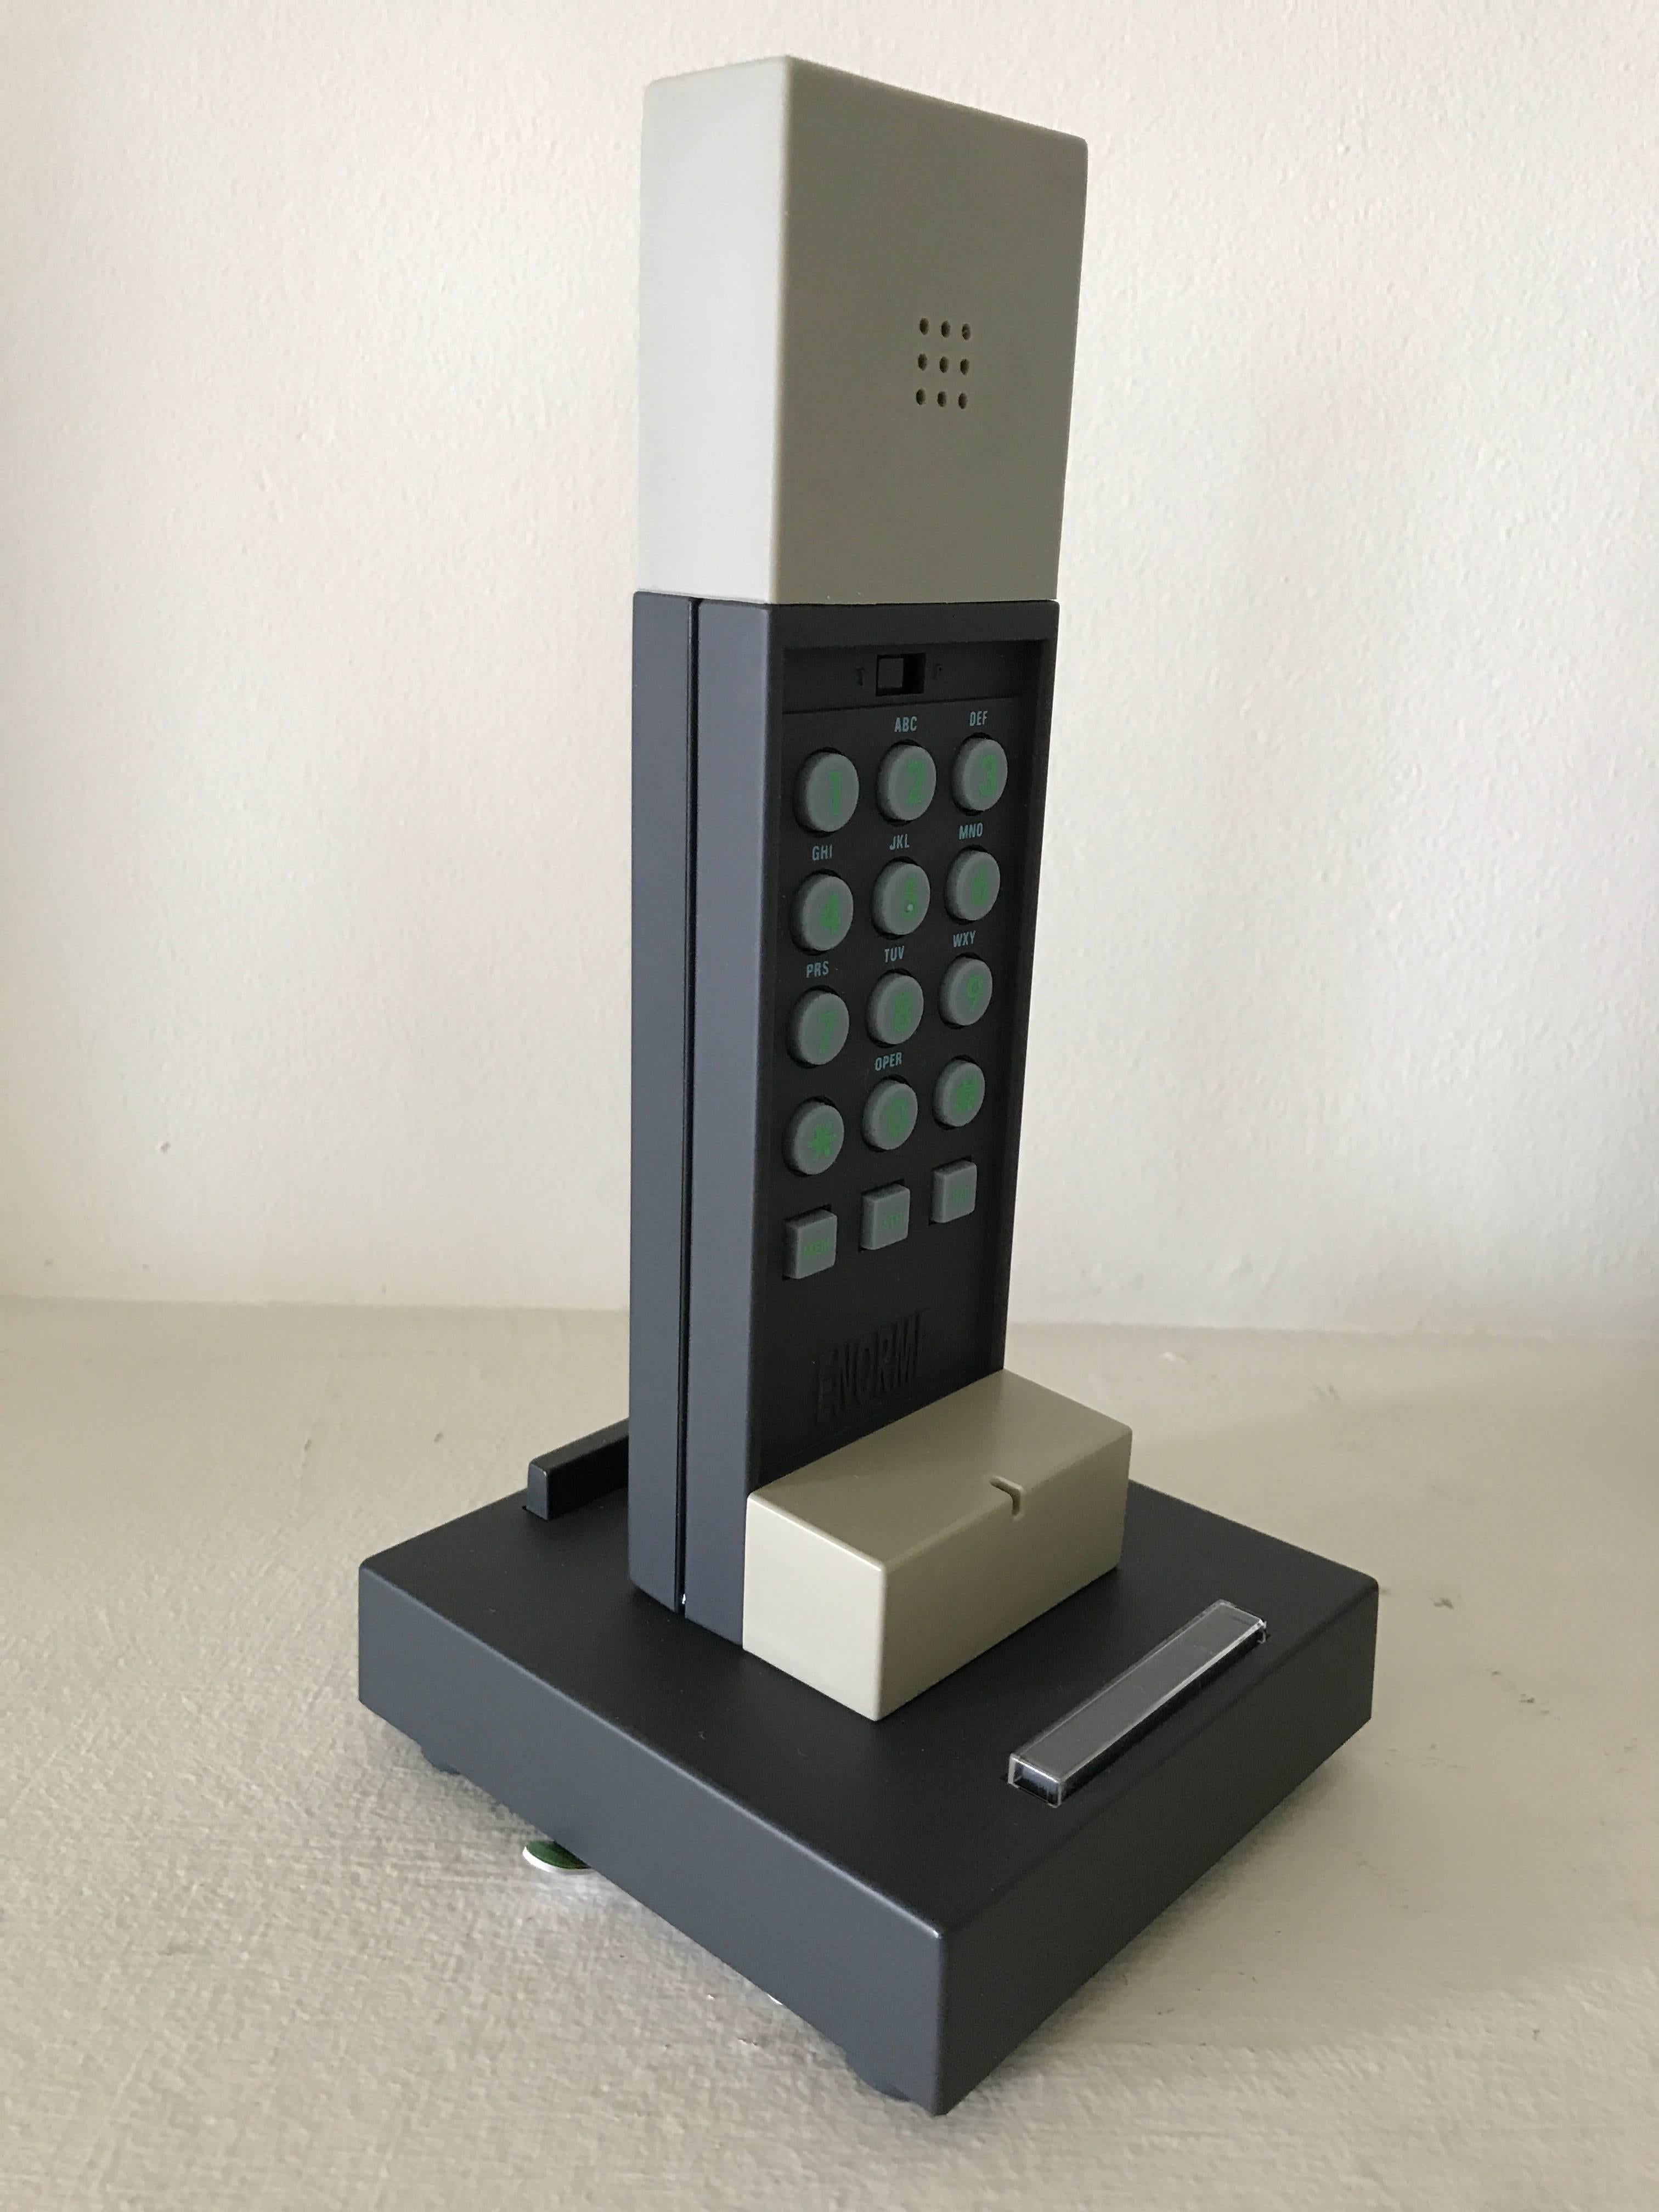 Original Enorme phone in black and grey designed by Ettore Sottsass for Sottsass Associati and Brondi Telephonia S.p.A. Phone has been tested and works.